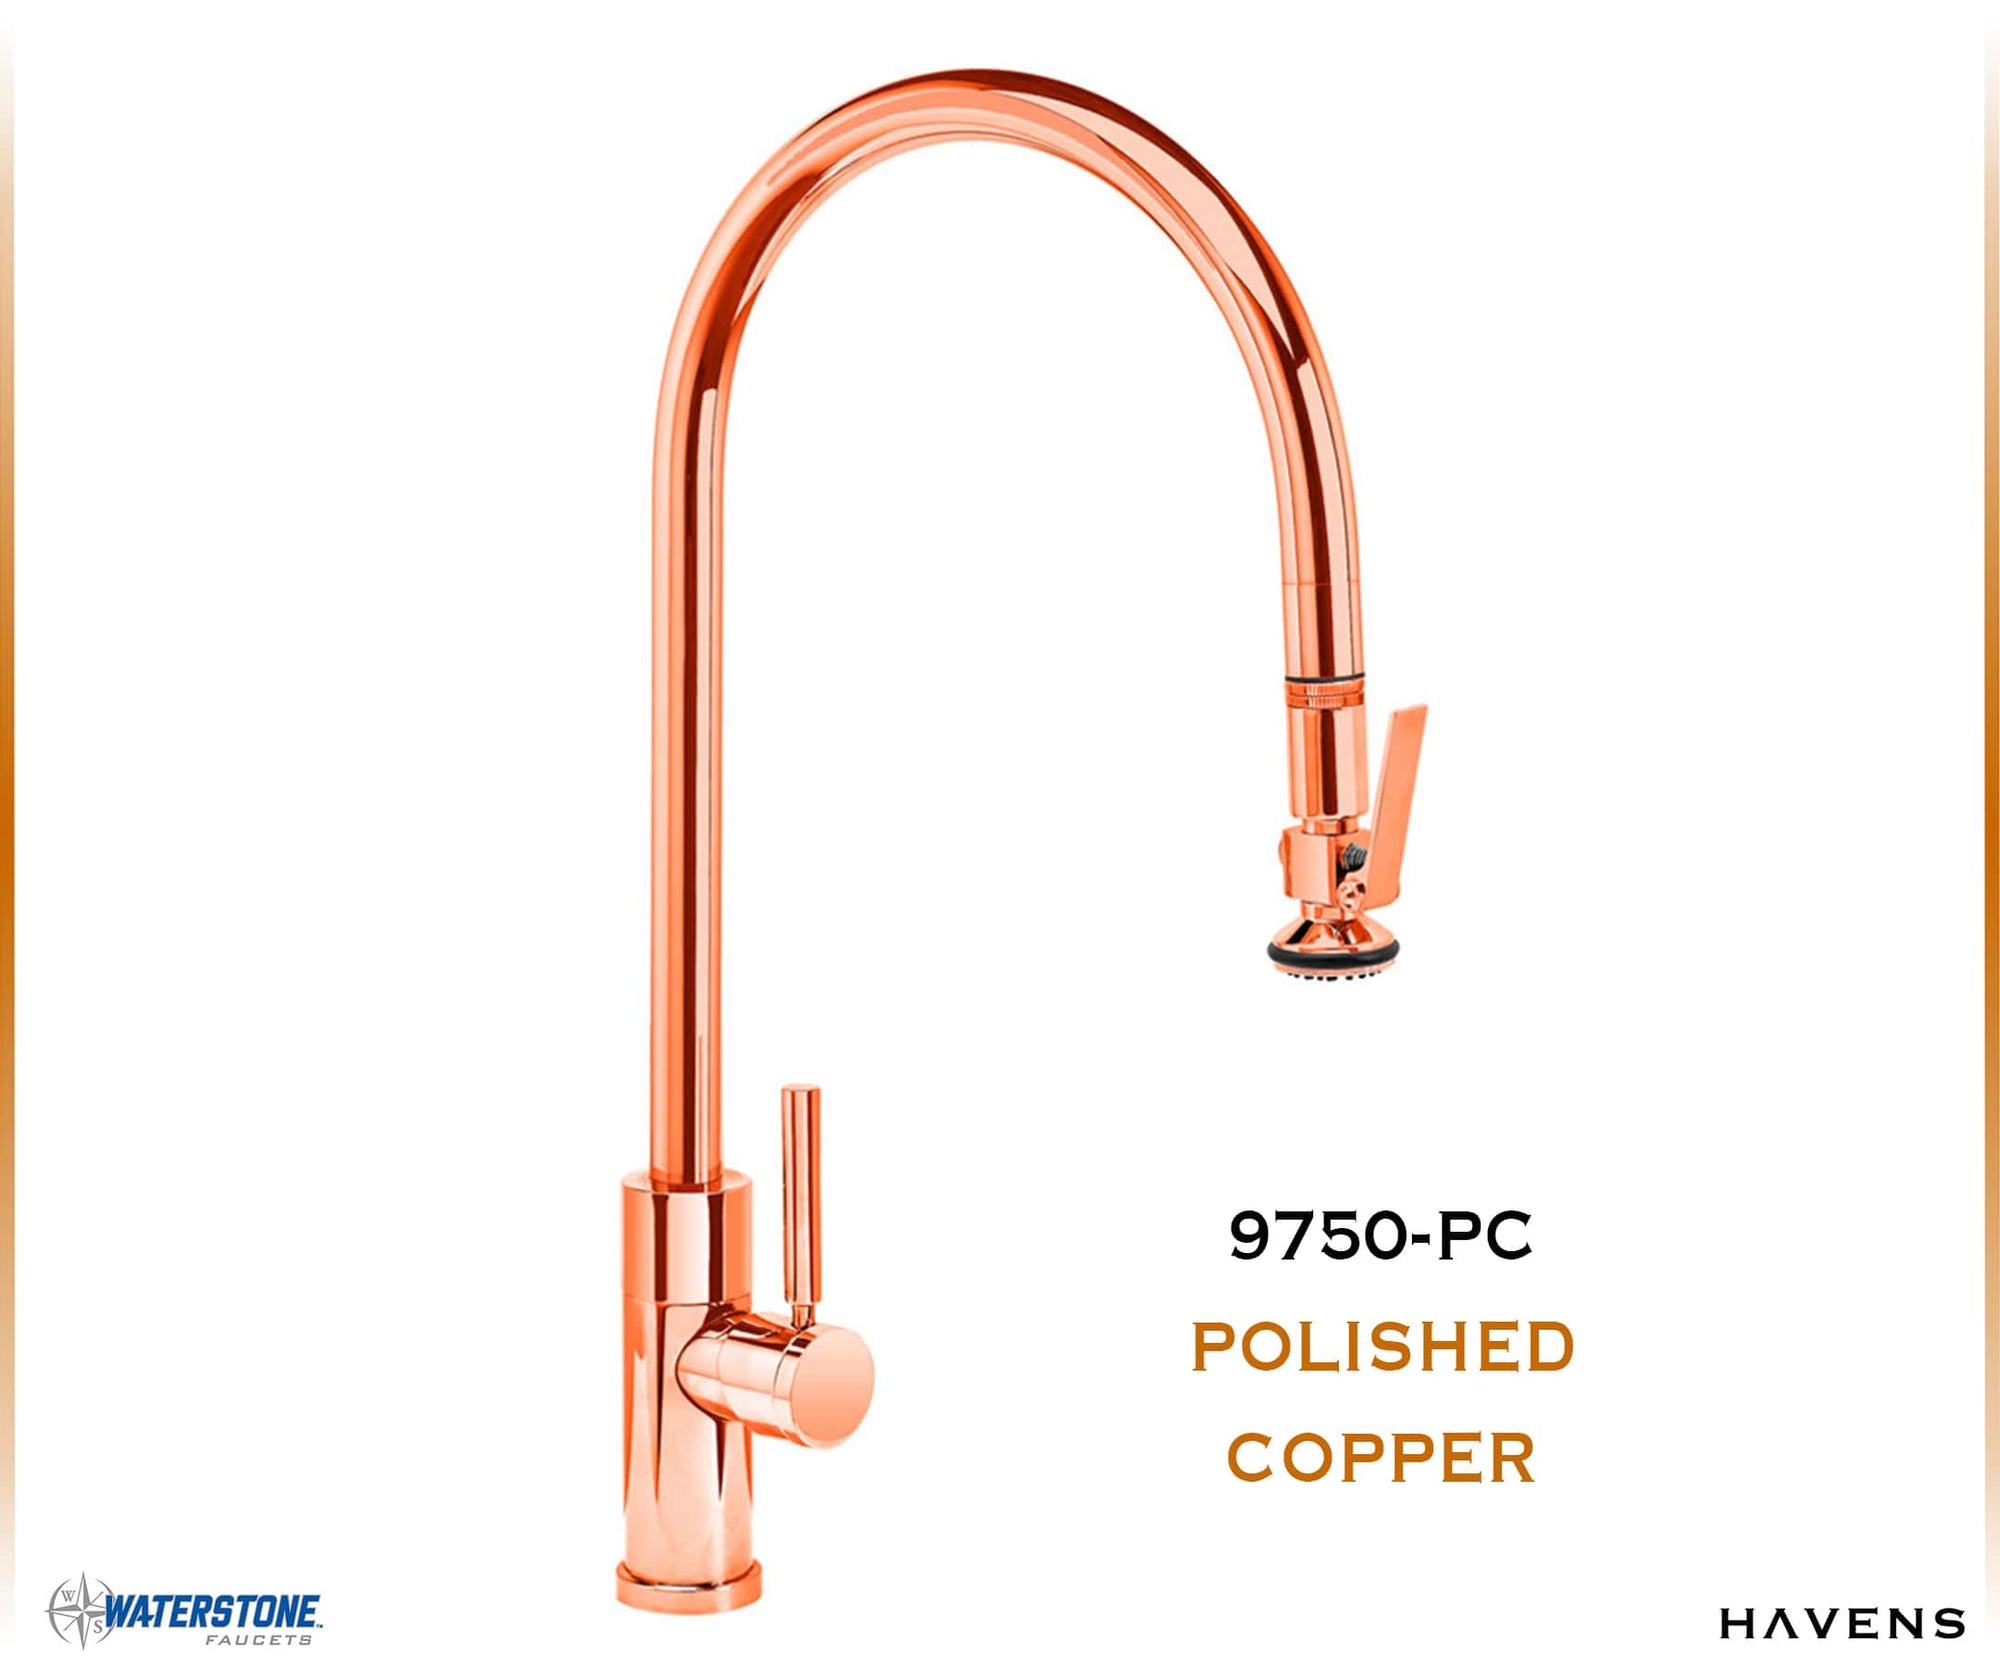 Waterstone Modern Extended Reach PLP Pulldown Faucet - 9750